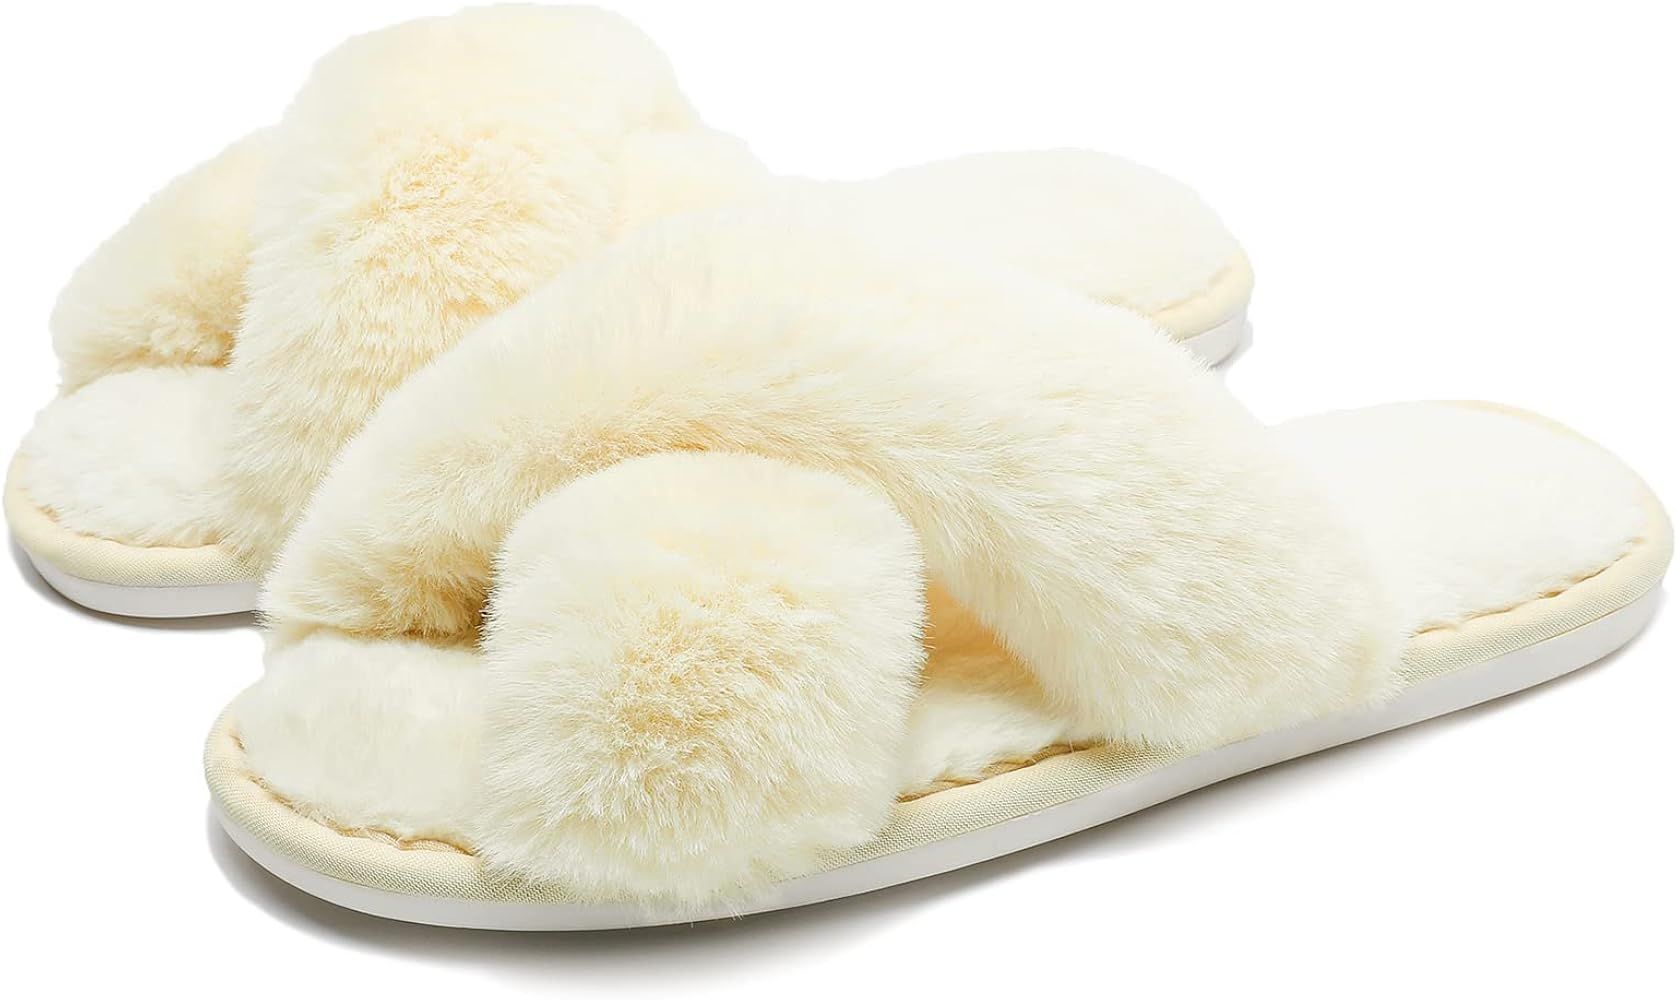 FACAXEDRE Slippers for Women, Fuzzy Slippers Fluffy House Women Slippers, Warm Plush Open Toe Cozy S | Amazon (US)